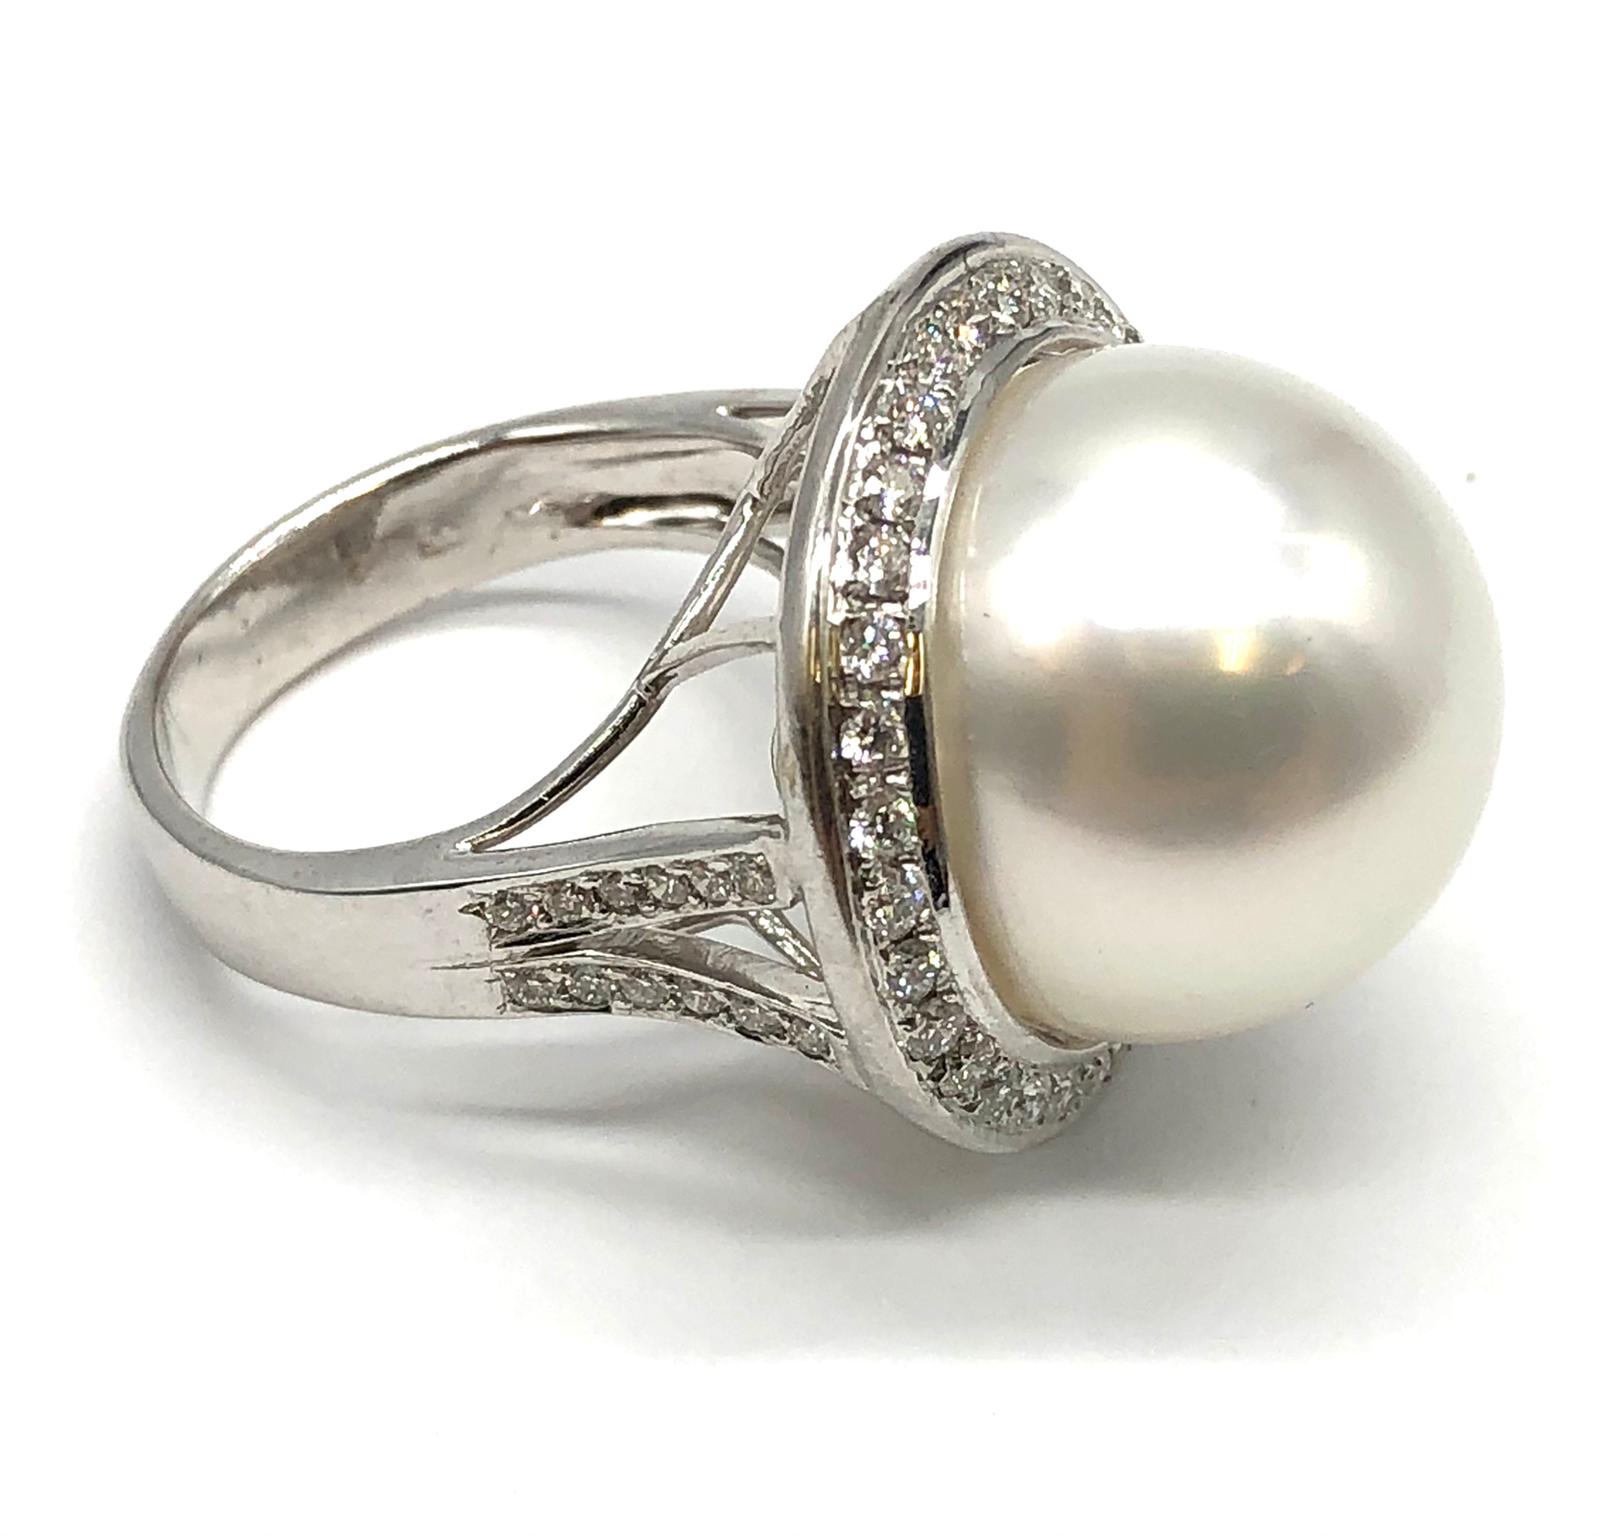 A large Kimoto pearl (17mm diameter) ring set in diamond and 18ct white gold ring, weight 14.43g and - Image 9 of 13